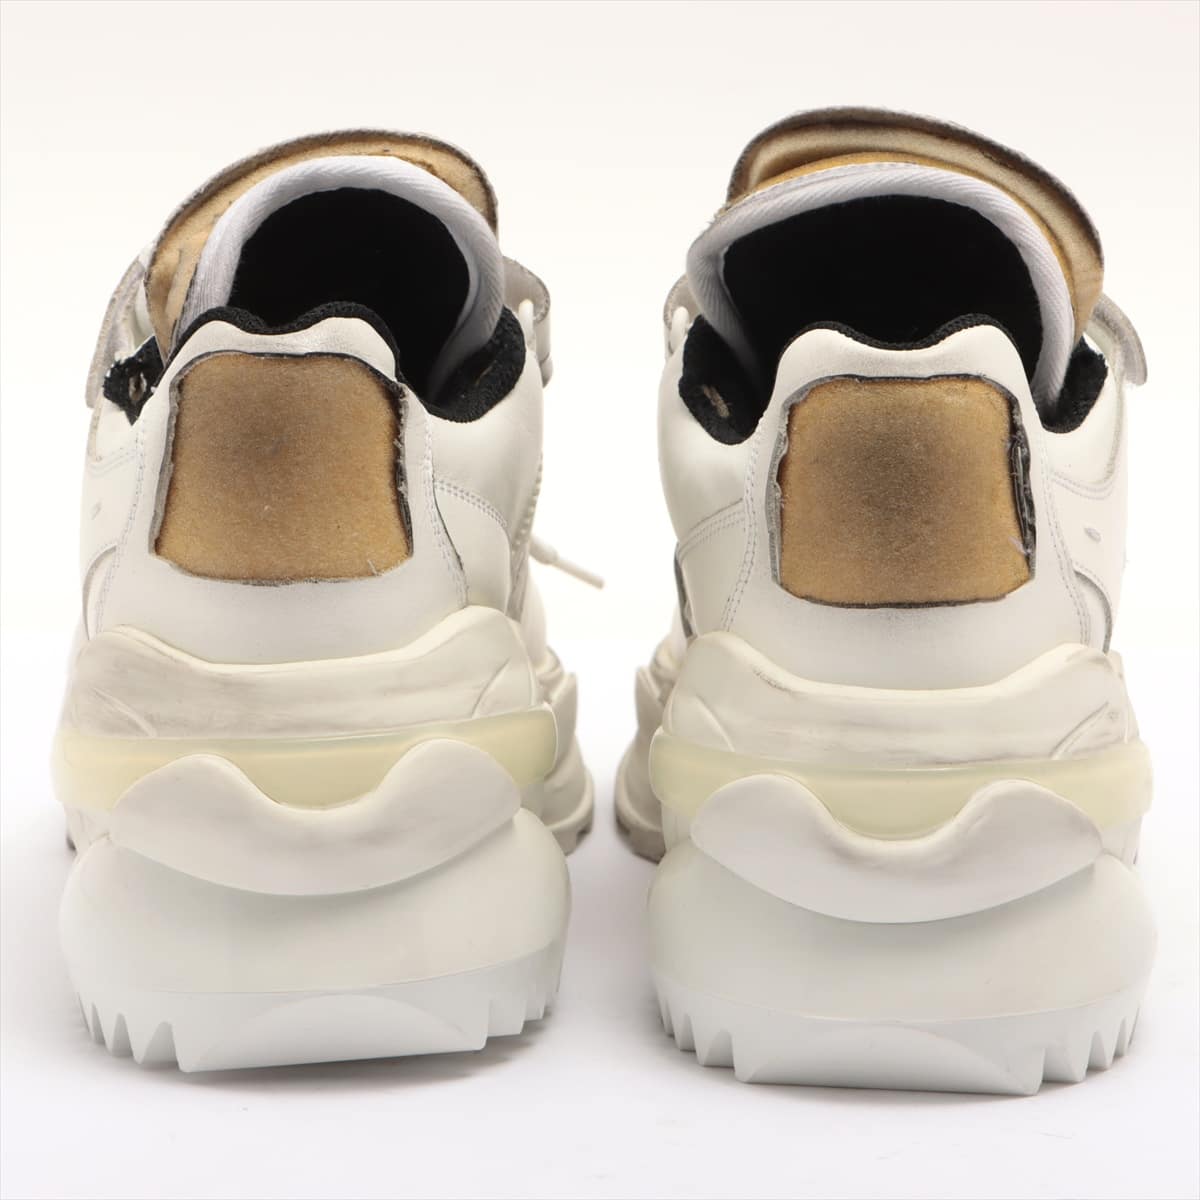 Maison Margiela Leather Sneakers 43 Men's White 22 retro fit chunky sneakers Vintage processing